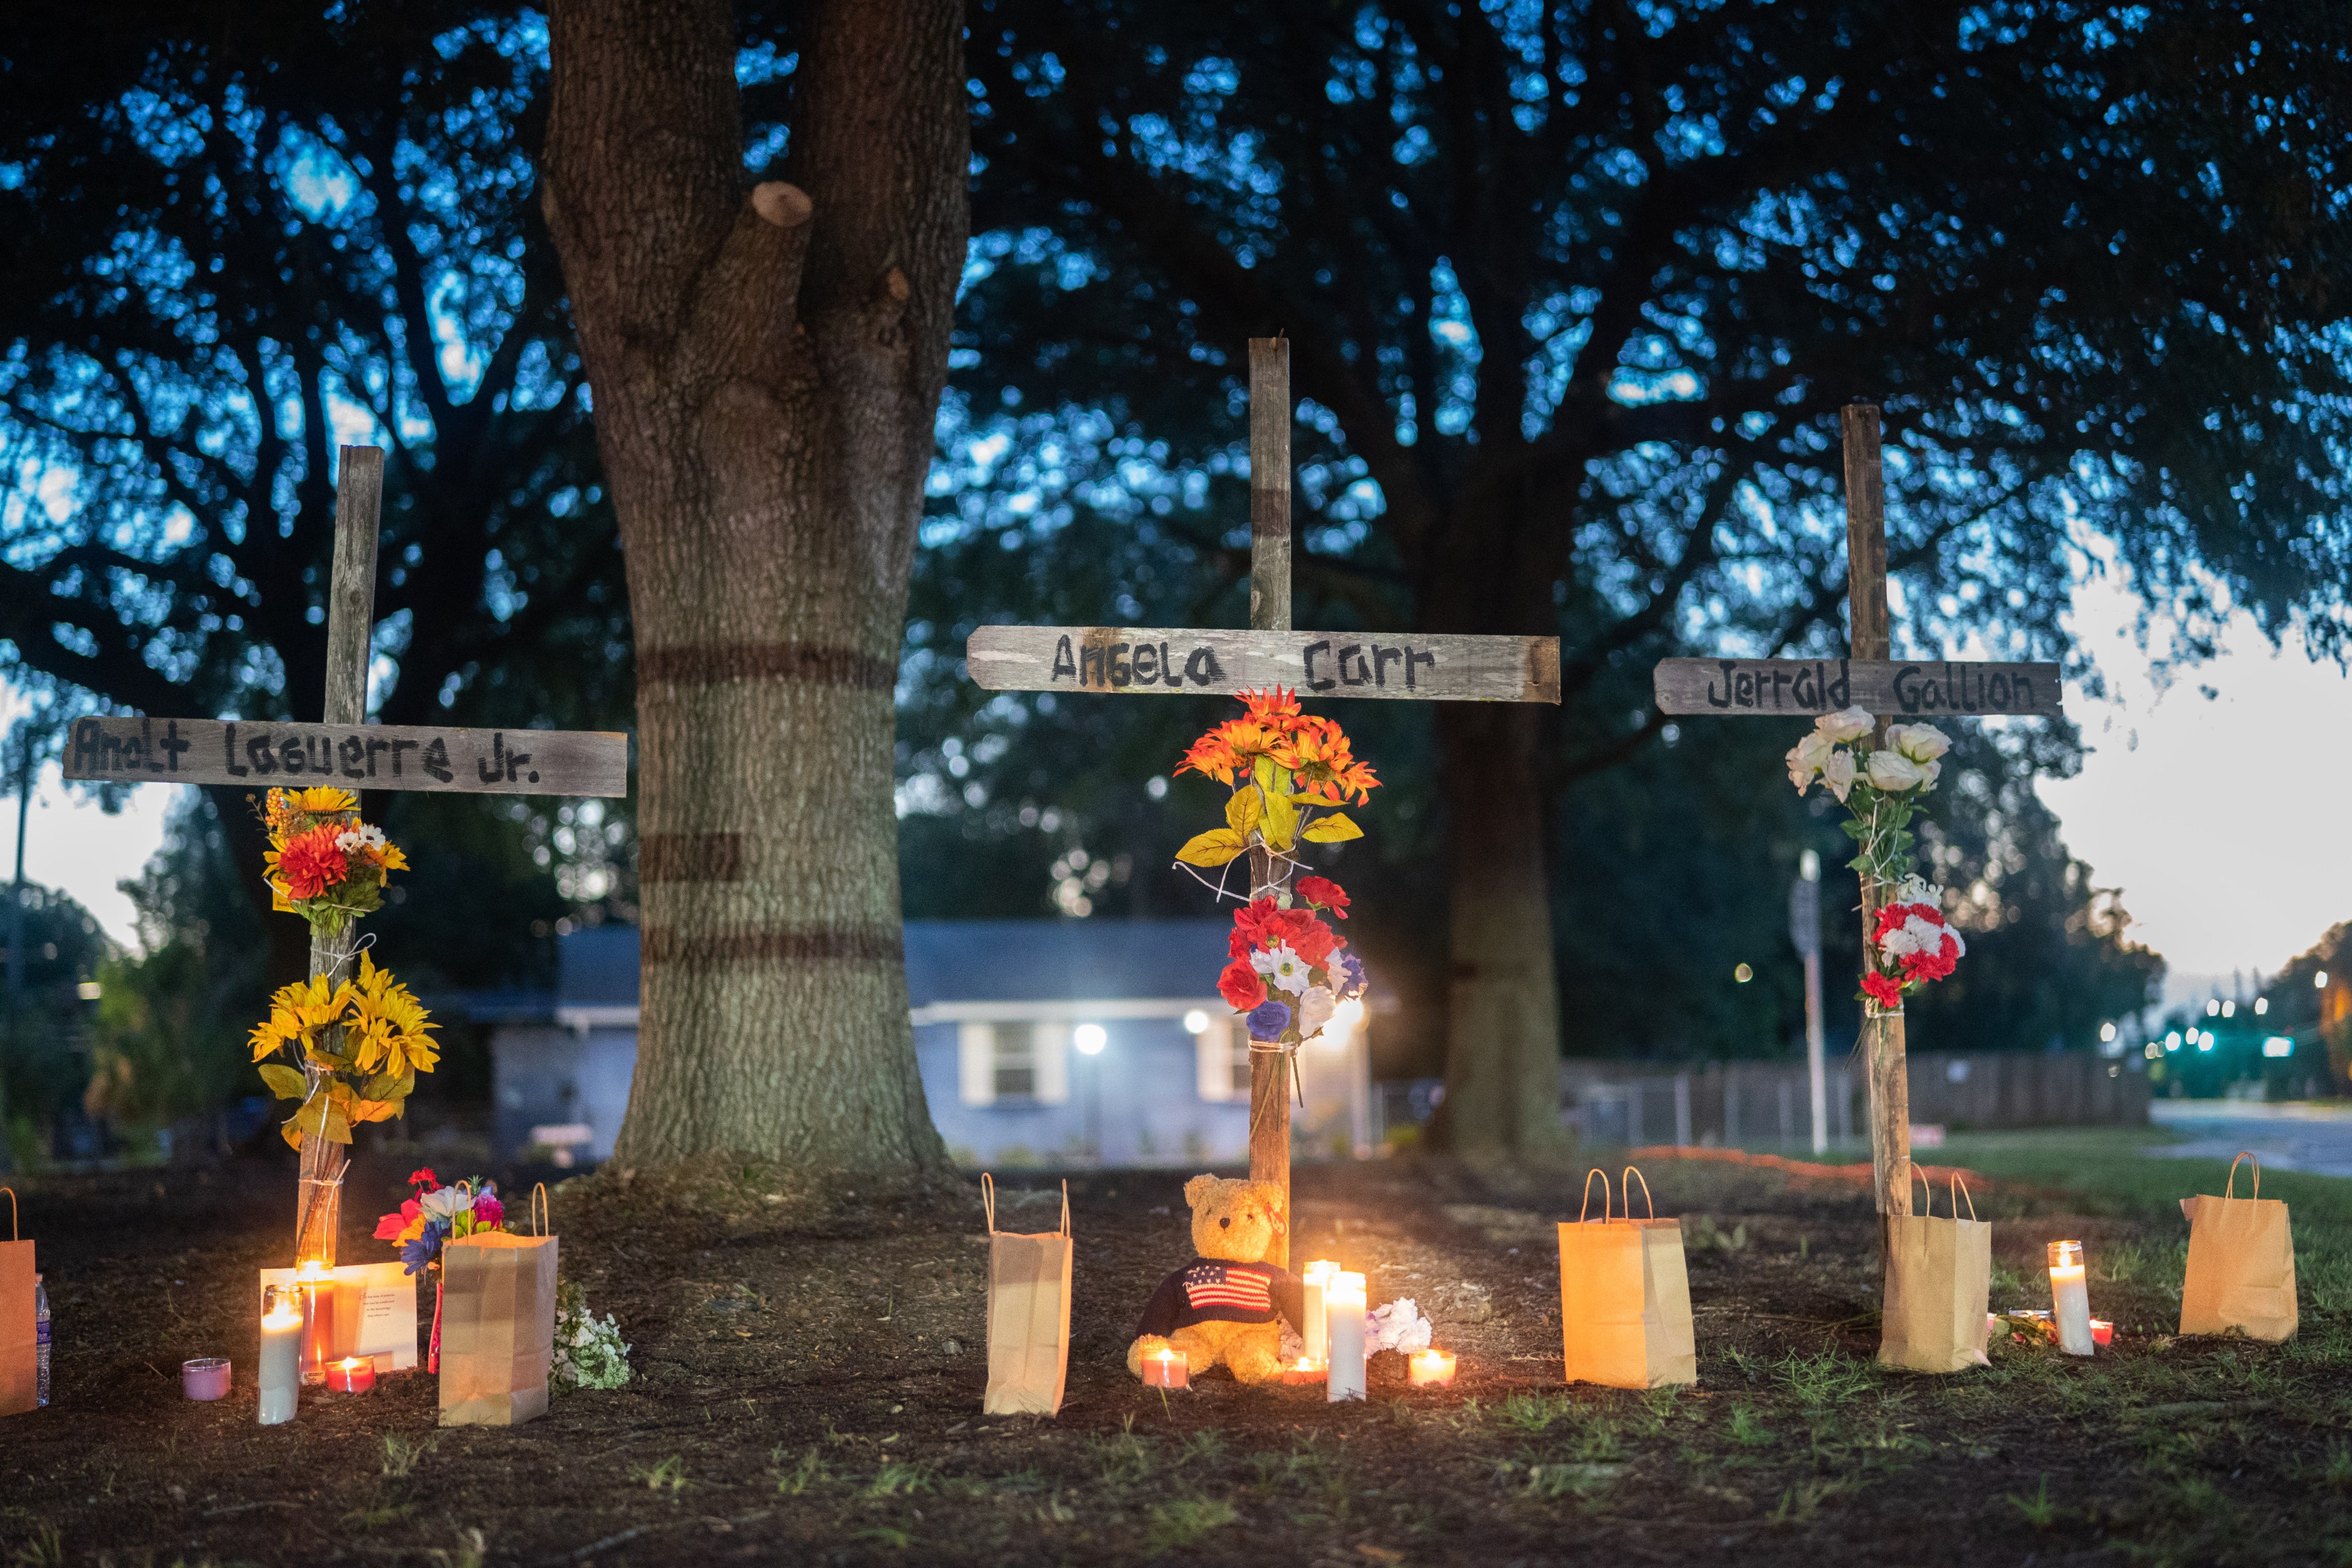 Three grave market crosses stand in front of a tree with flowers tied to them, teddy bears, paper bags and candles are on the ground